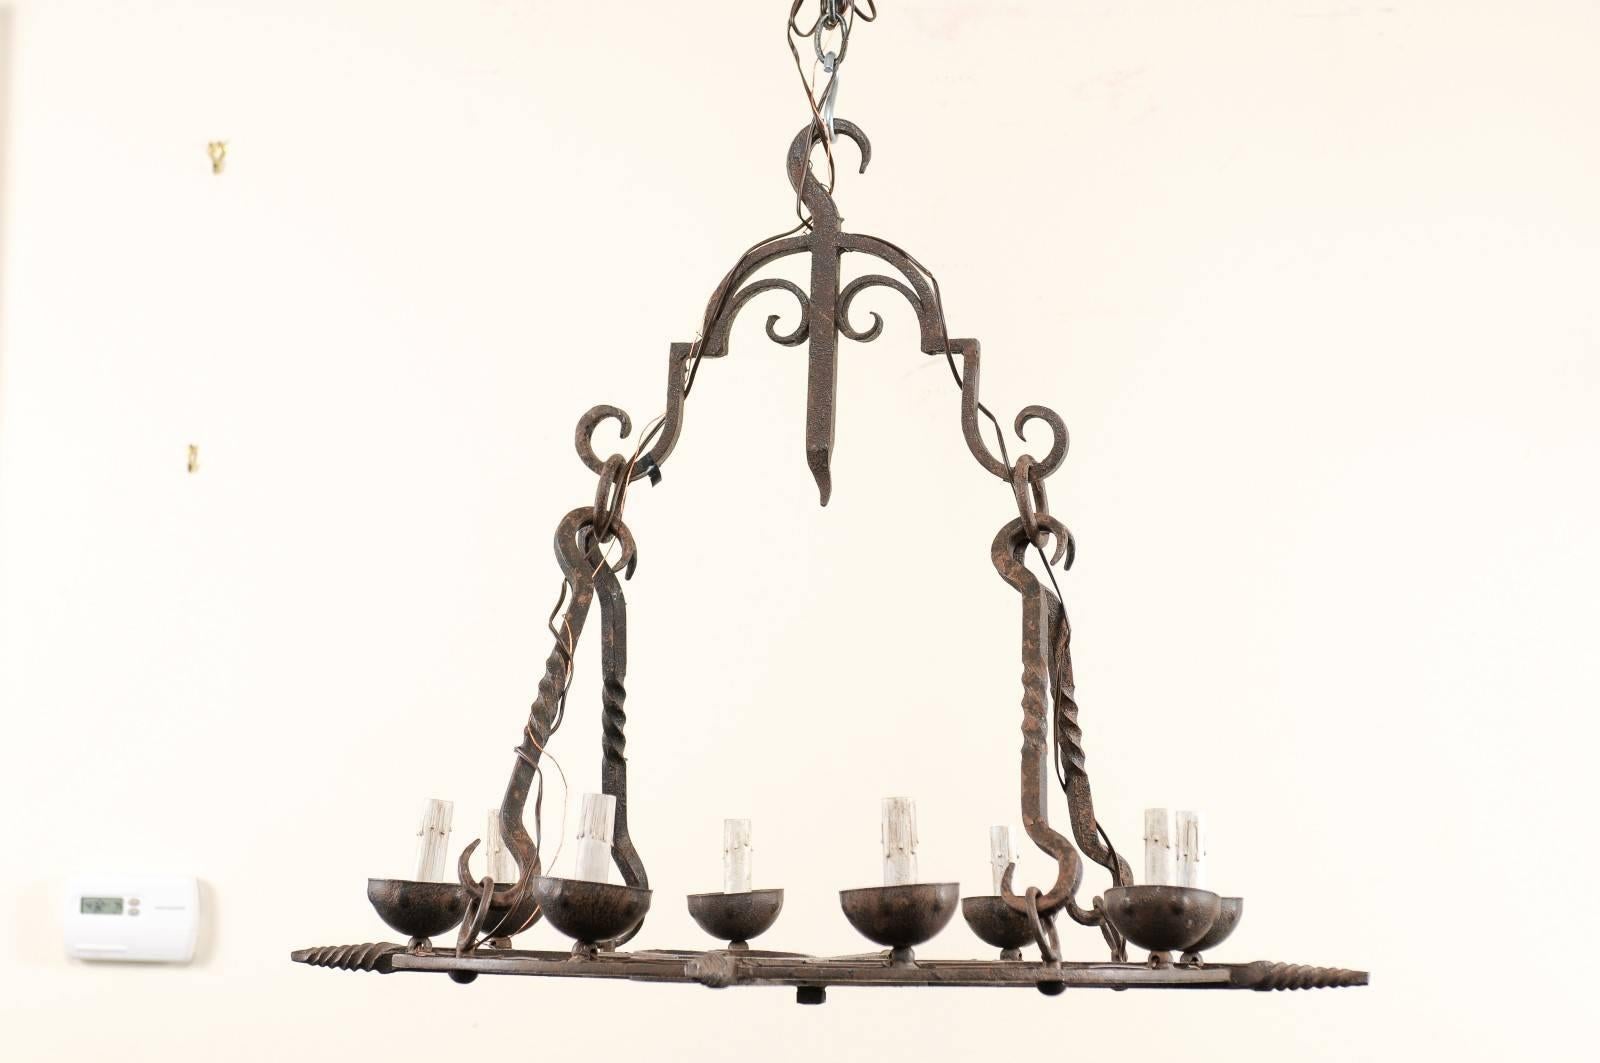 A French mid-century eight-light chandelier. This French chandelier from the mid-20th century of forged iron has a flattened, circular shaped body which supports the eight iron bobèche cups and candle covers around its perimeter. The lower section